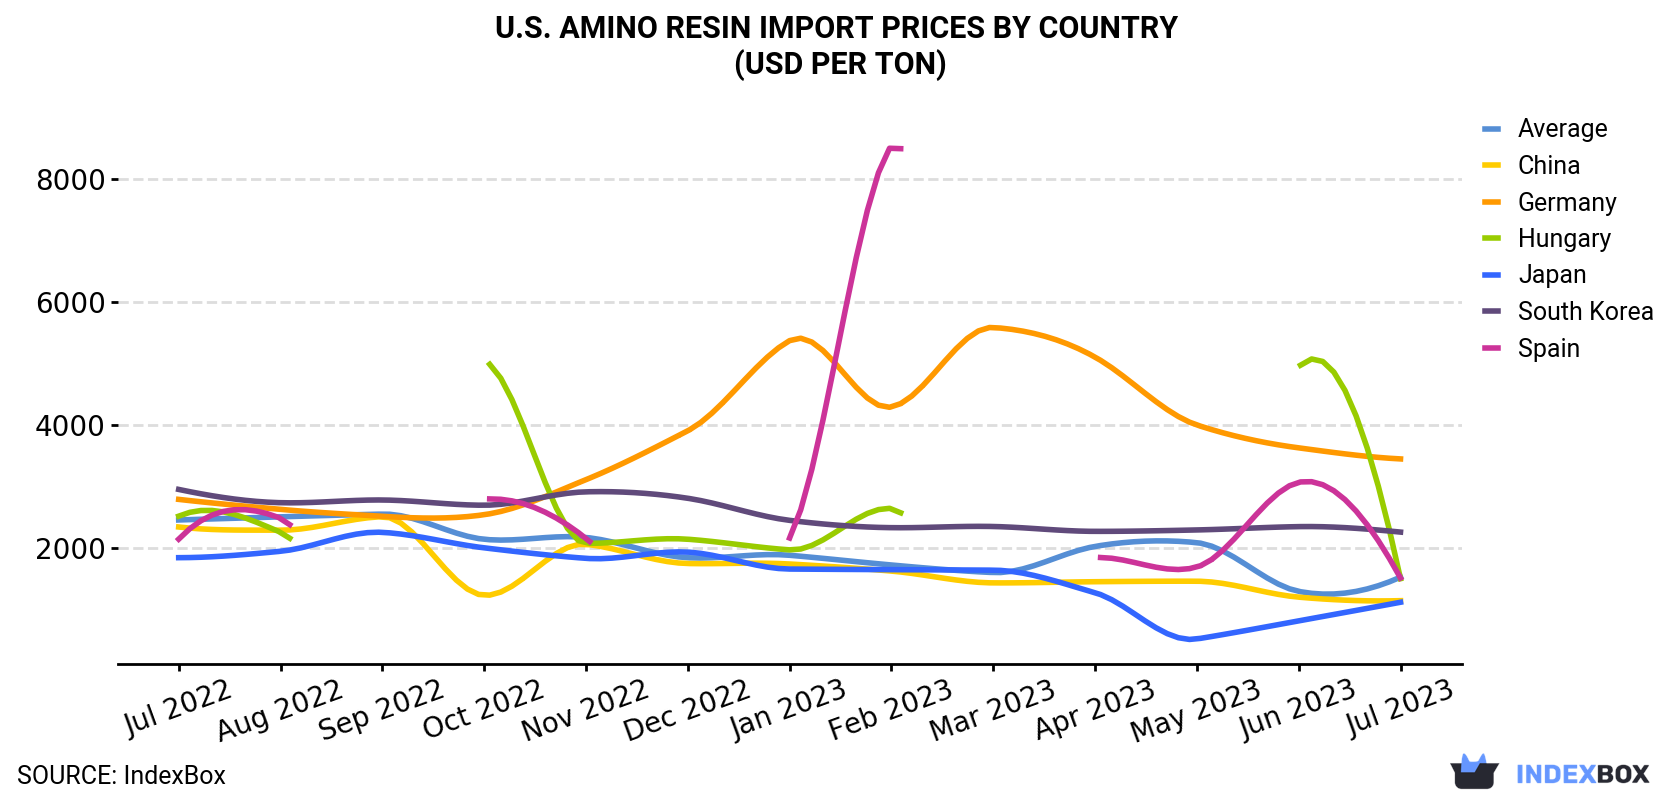 U.S. Amino Resin Import Prices By Country (USD Per Ton)